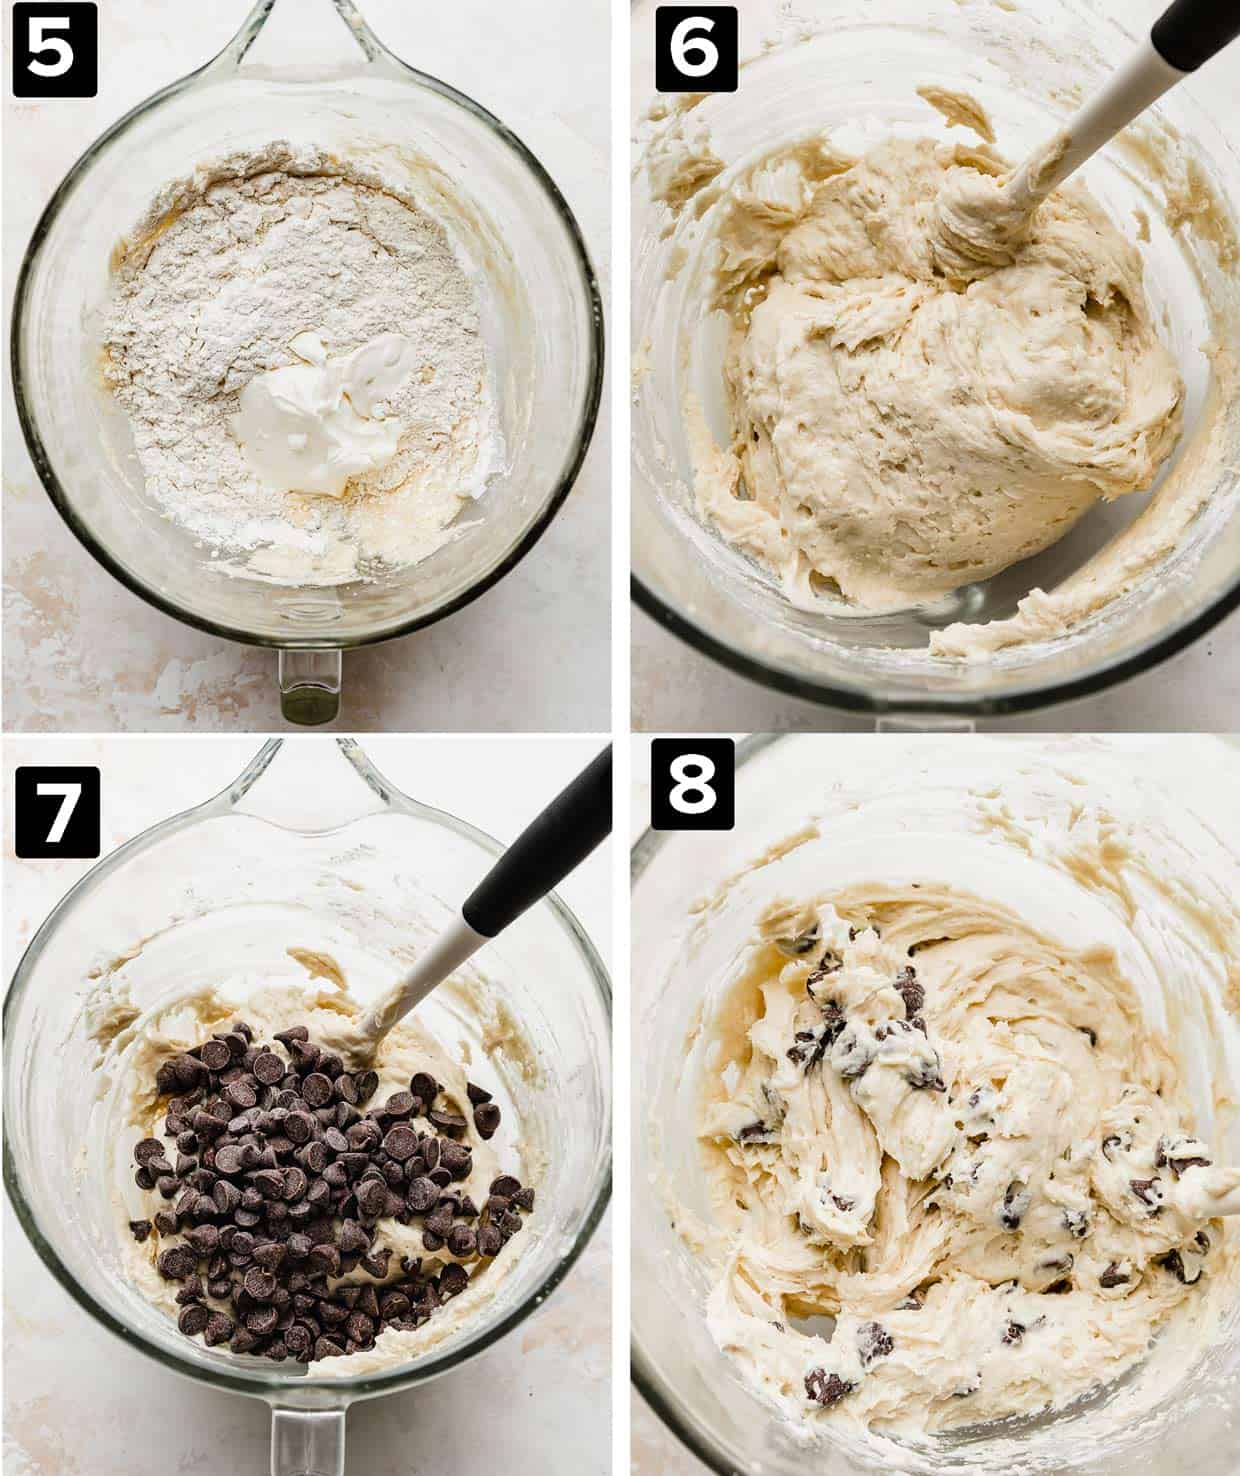 Four photos showing how to make Cinnamon Chocolate Chip Coffee Cake batter, in a glass bowl with adding dry ingredients to the chocolate chips, to stirring together.